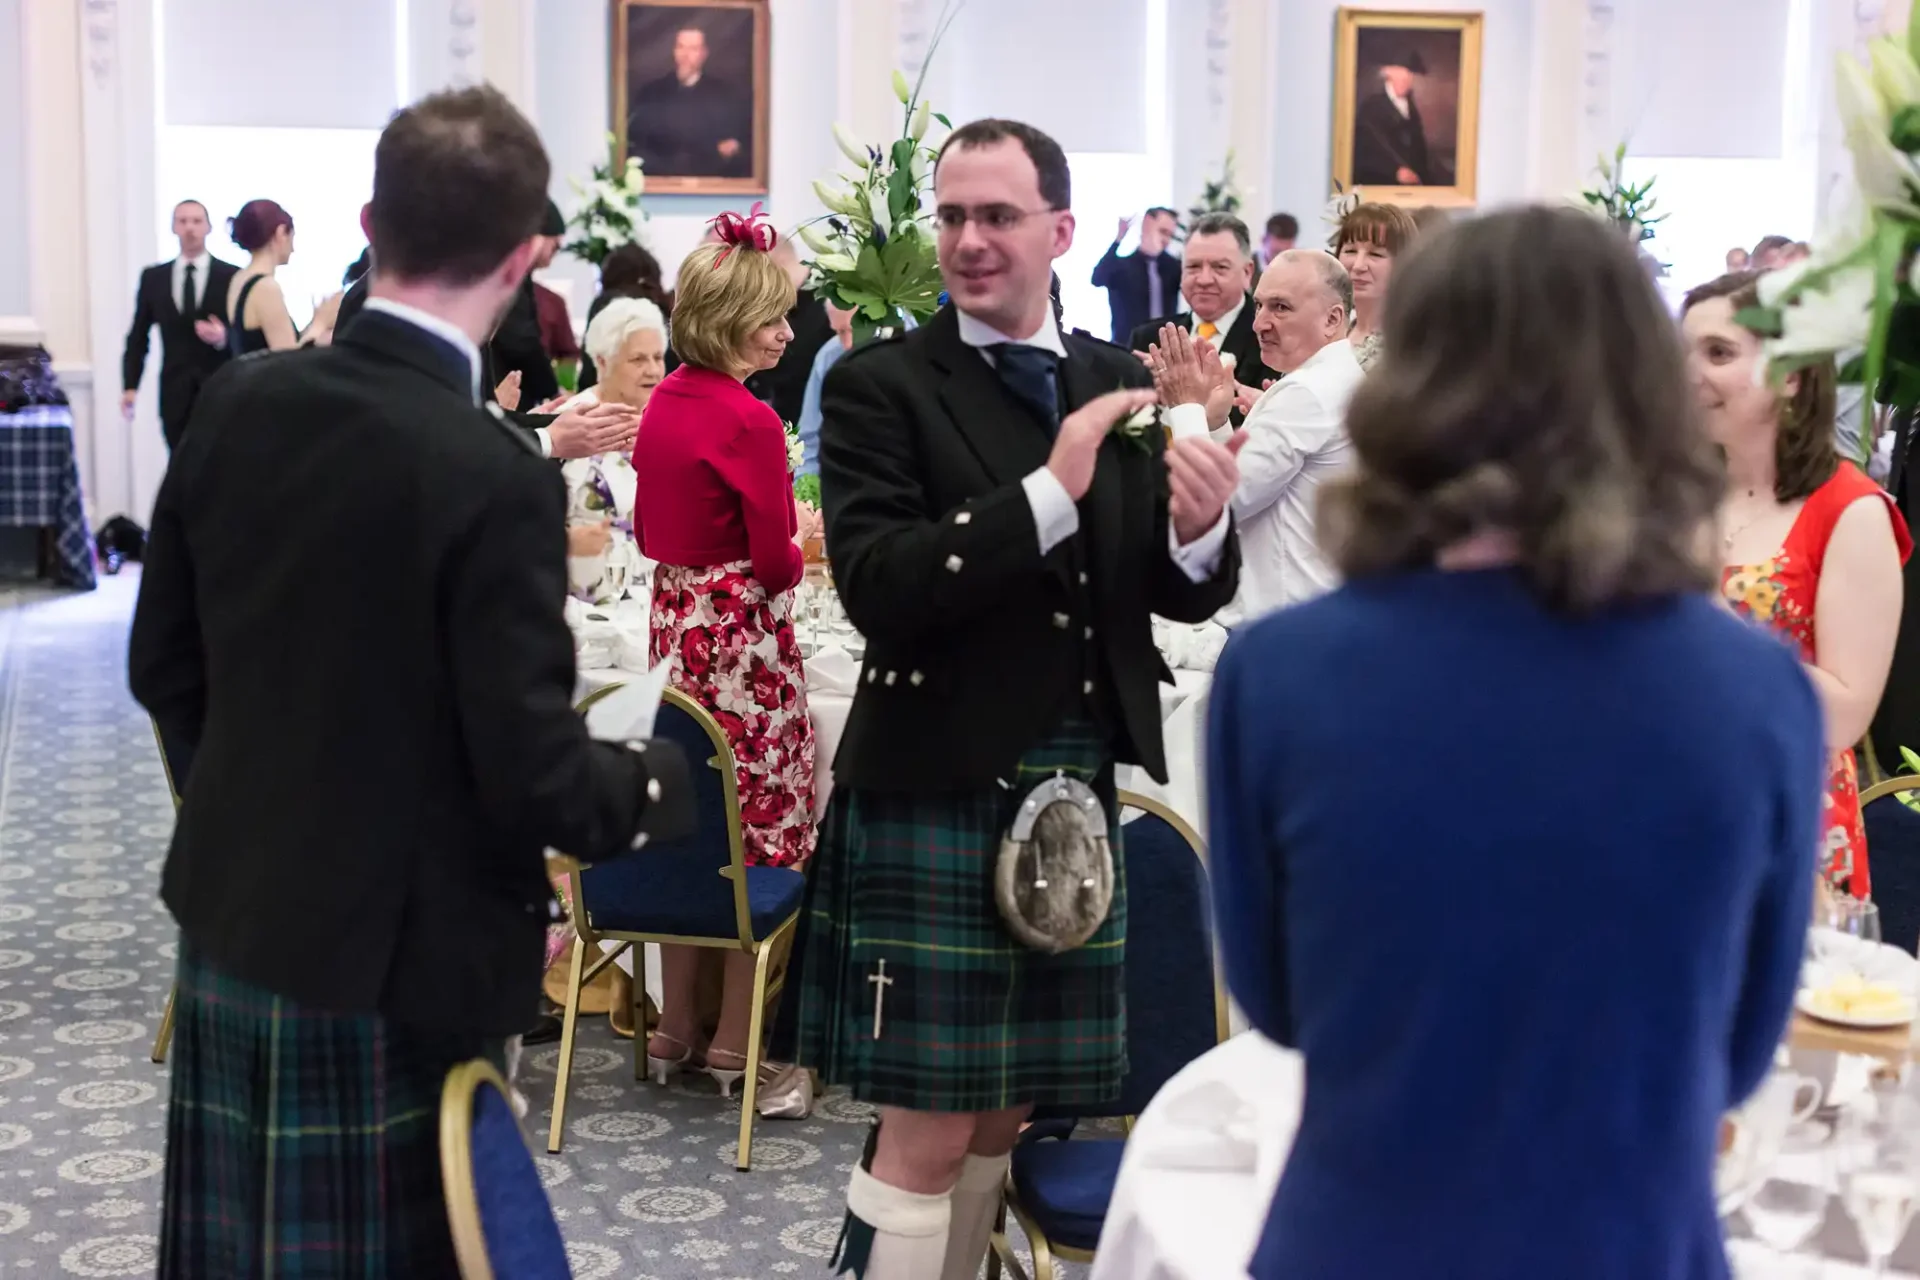 Men in kilts clapping at a lively indoor event with seated and standing guests, some engaged in conversation.